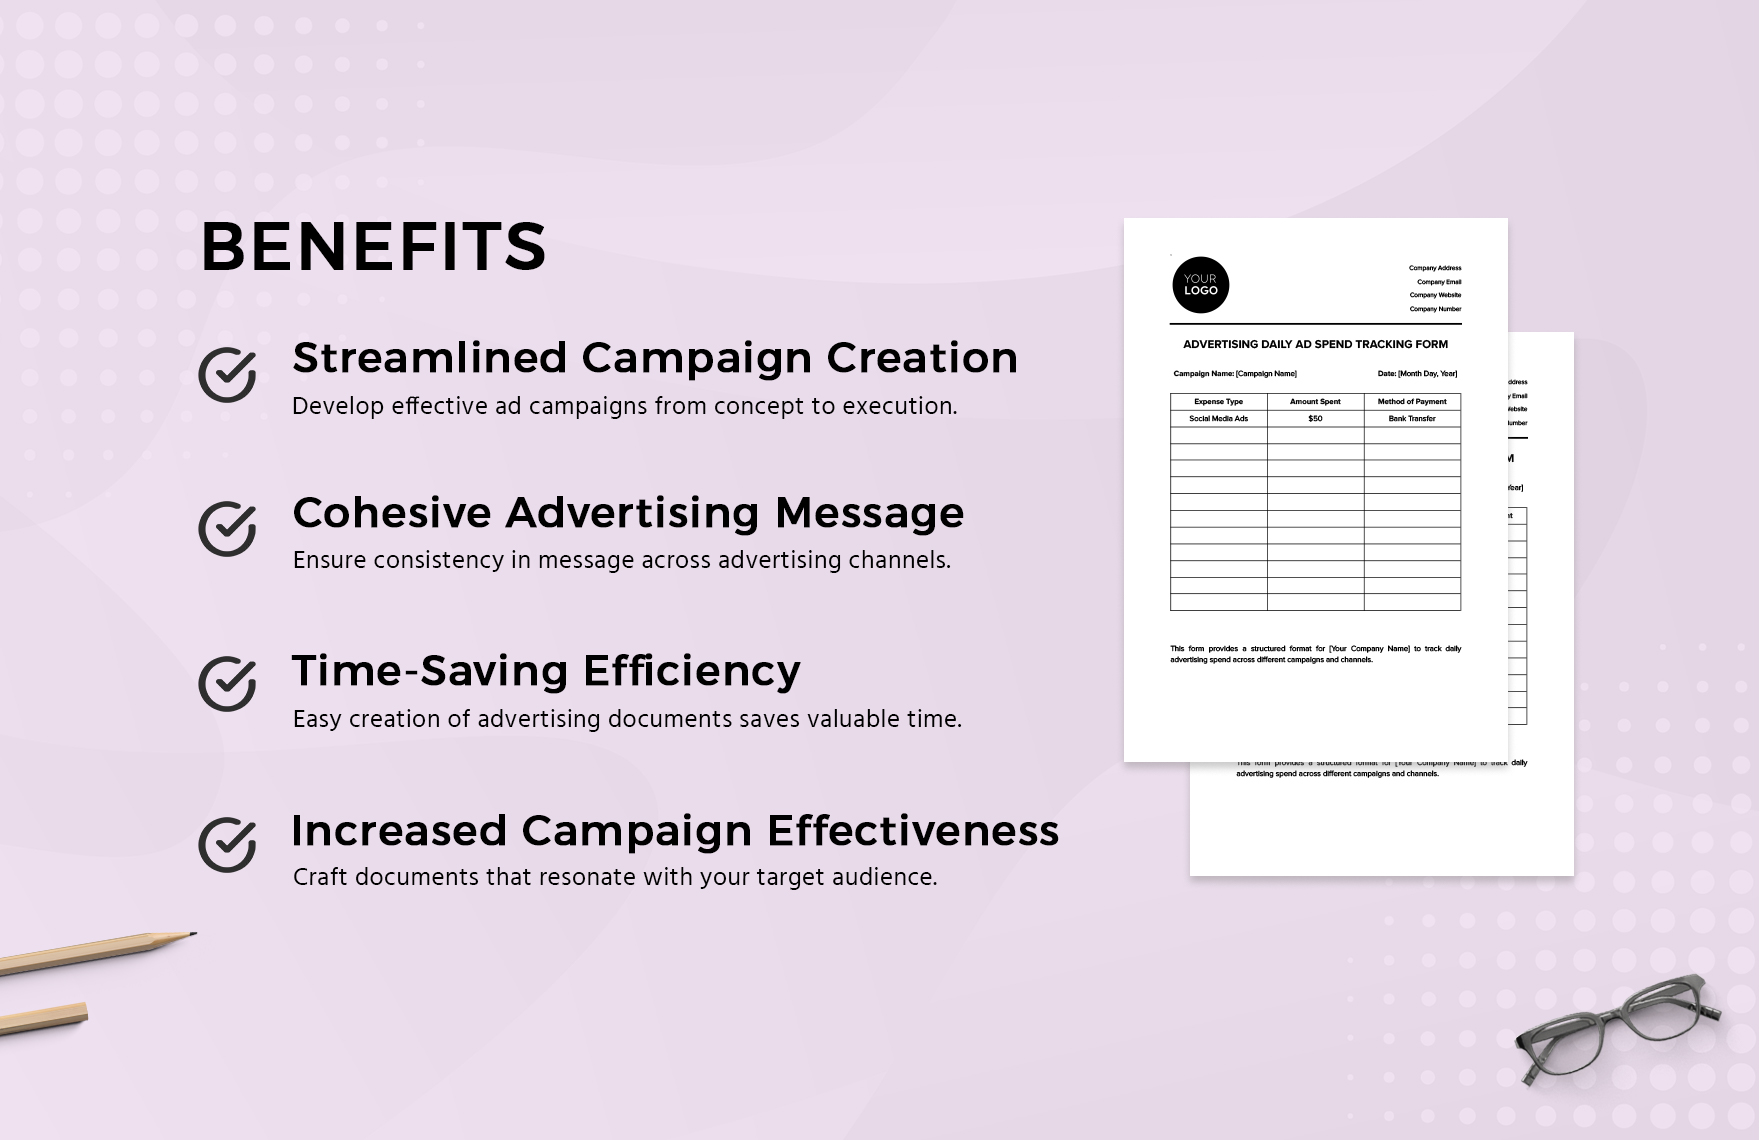 Advertising Daily Ad Spend Tracking Form Template